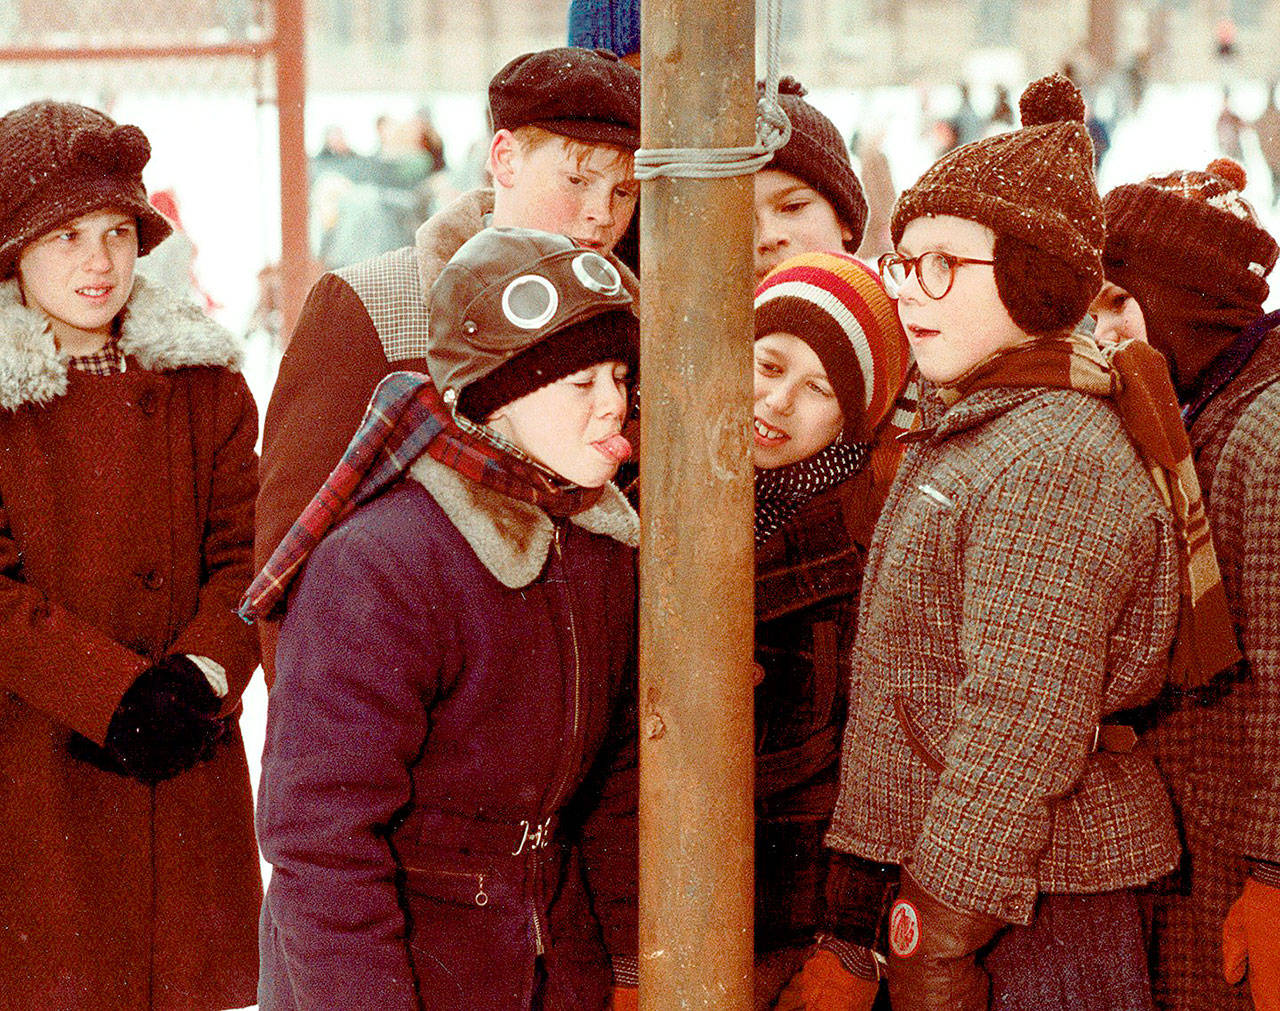 Scott Schwartz, left, as Flik, and Peter Billingsley, right, as Ralphie in a scene from “A Christmas Story.” (MGM)